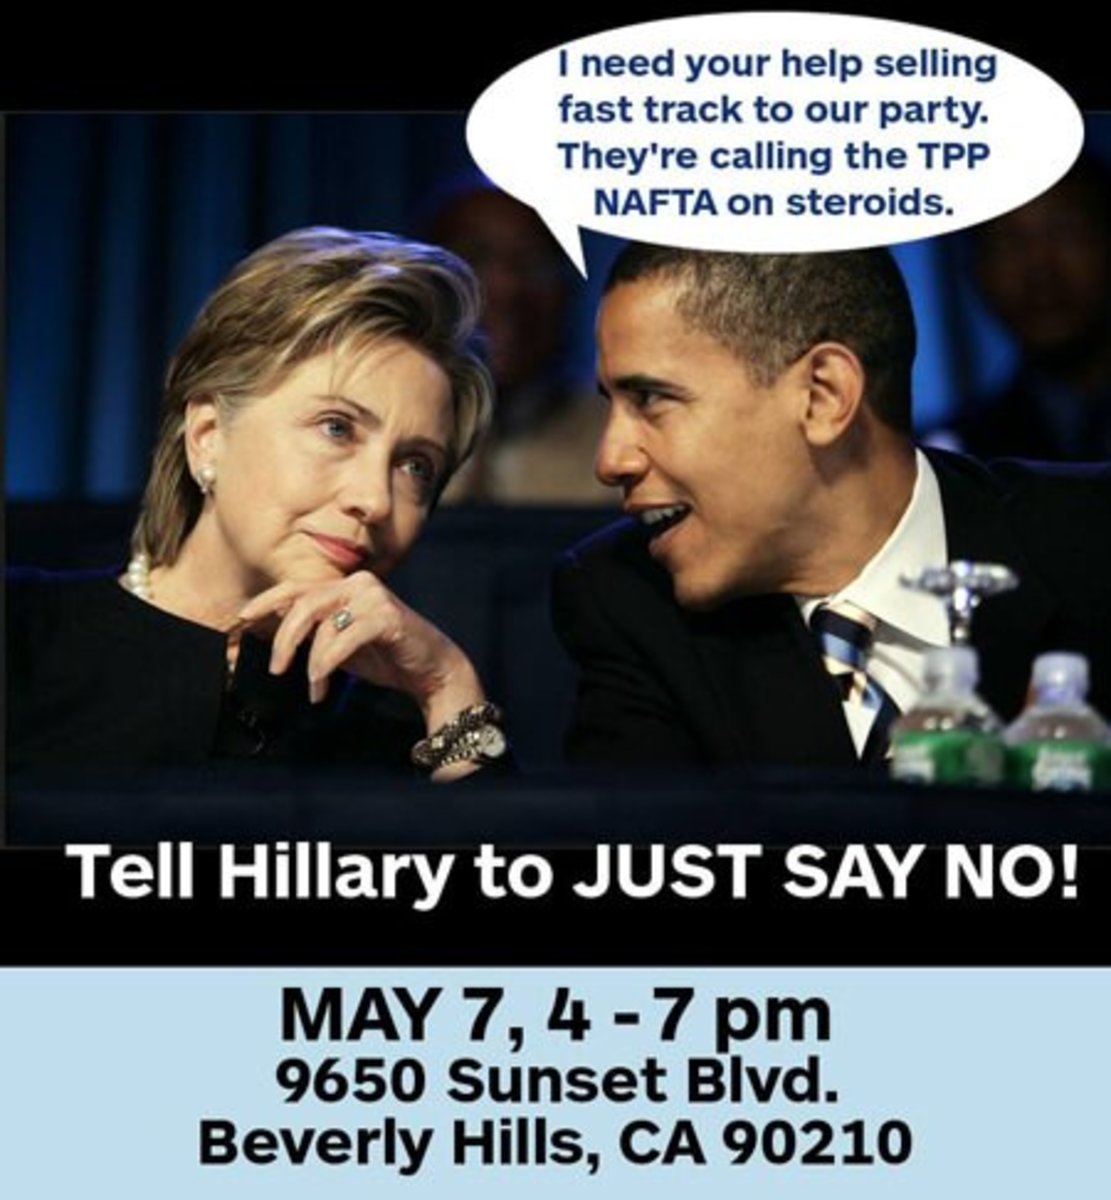 Tell Hillary to Oppose TPP